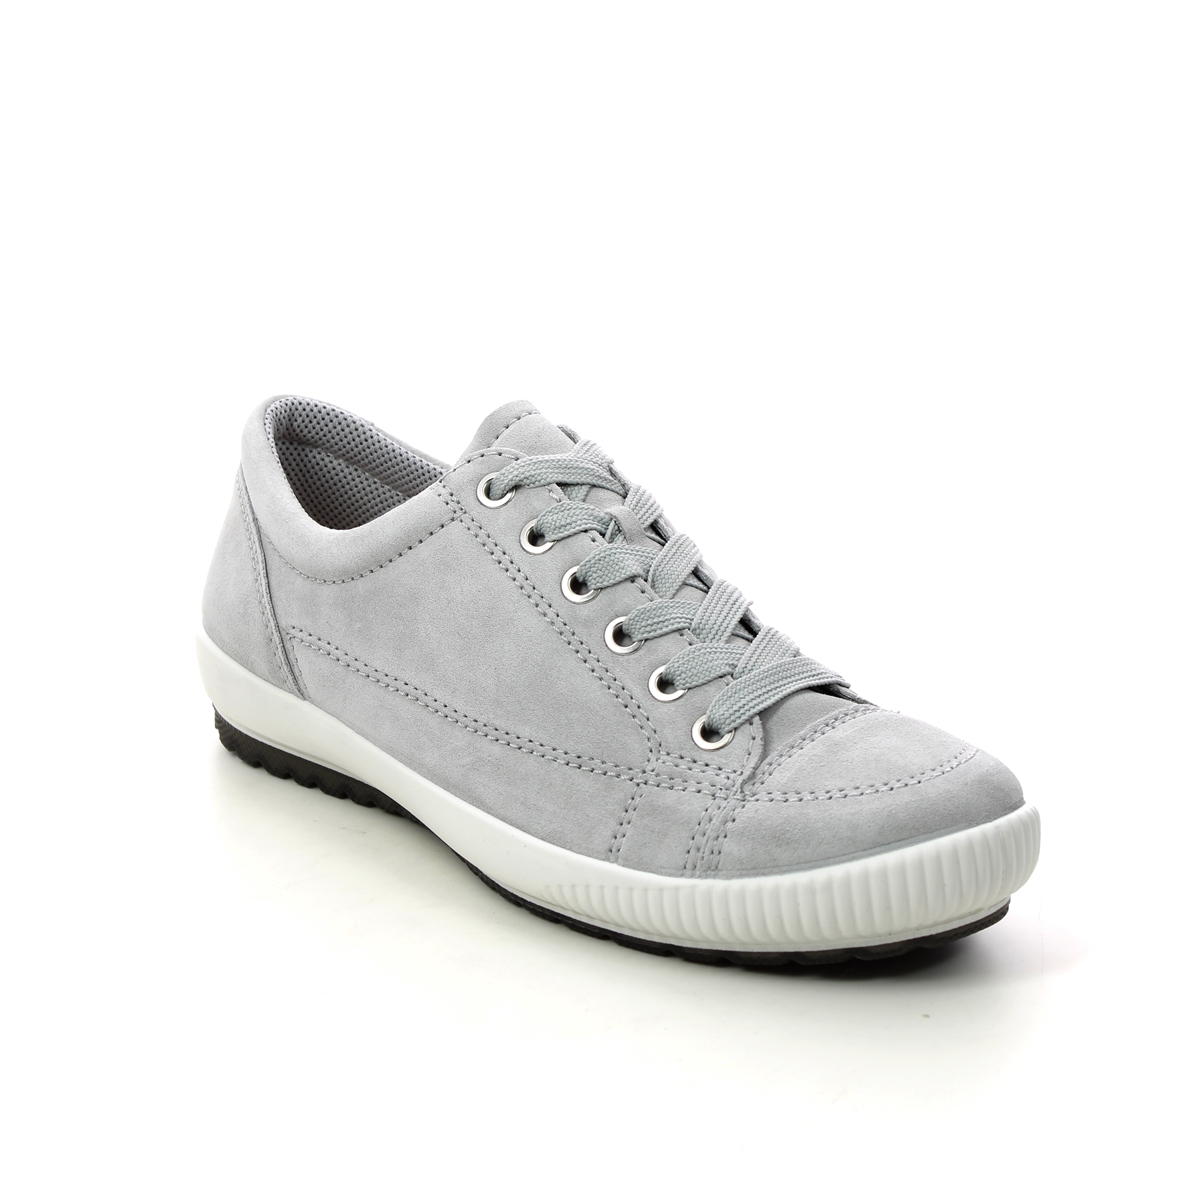 Legero Tanaro Stitch Light Grey Suede Womens Lacing Shoes 00820-25 In Size 4 In Plain Light Grey Suede